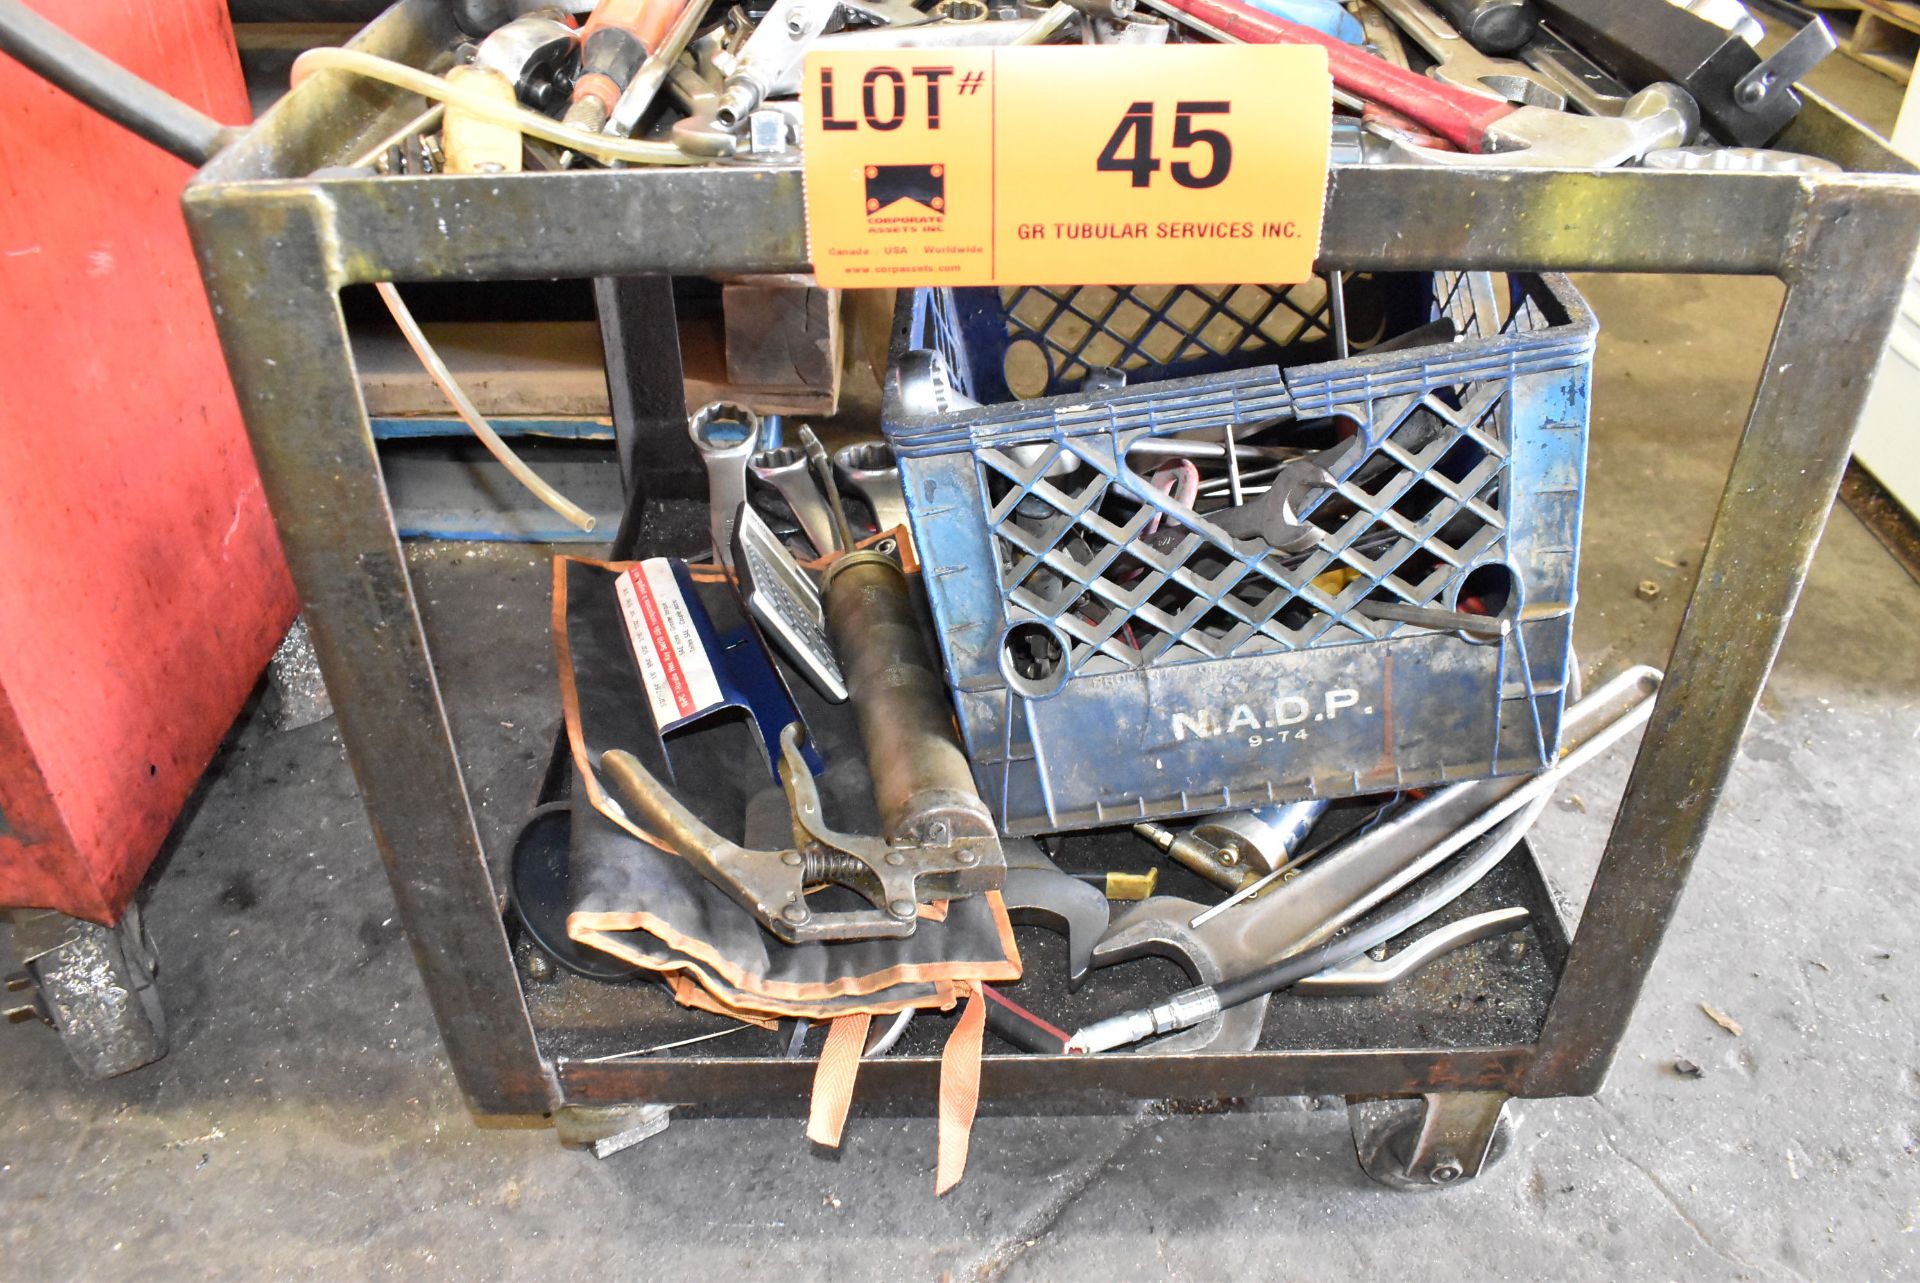 LOT/ CART WITH HAND TOOLS - Image 3 of 3